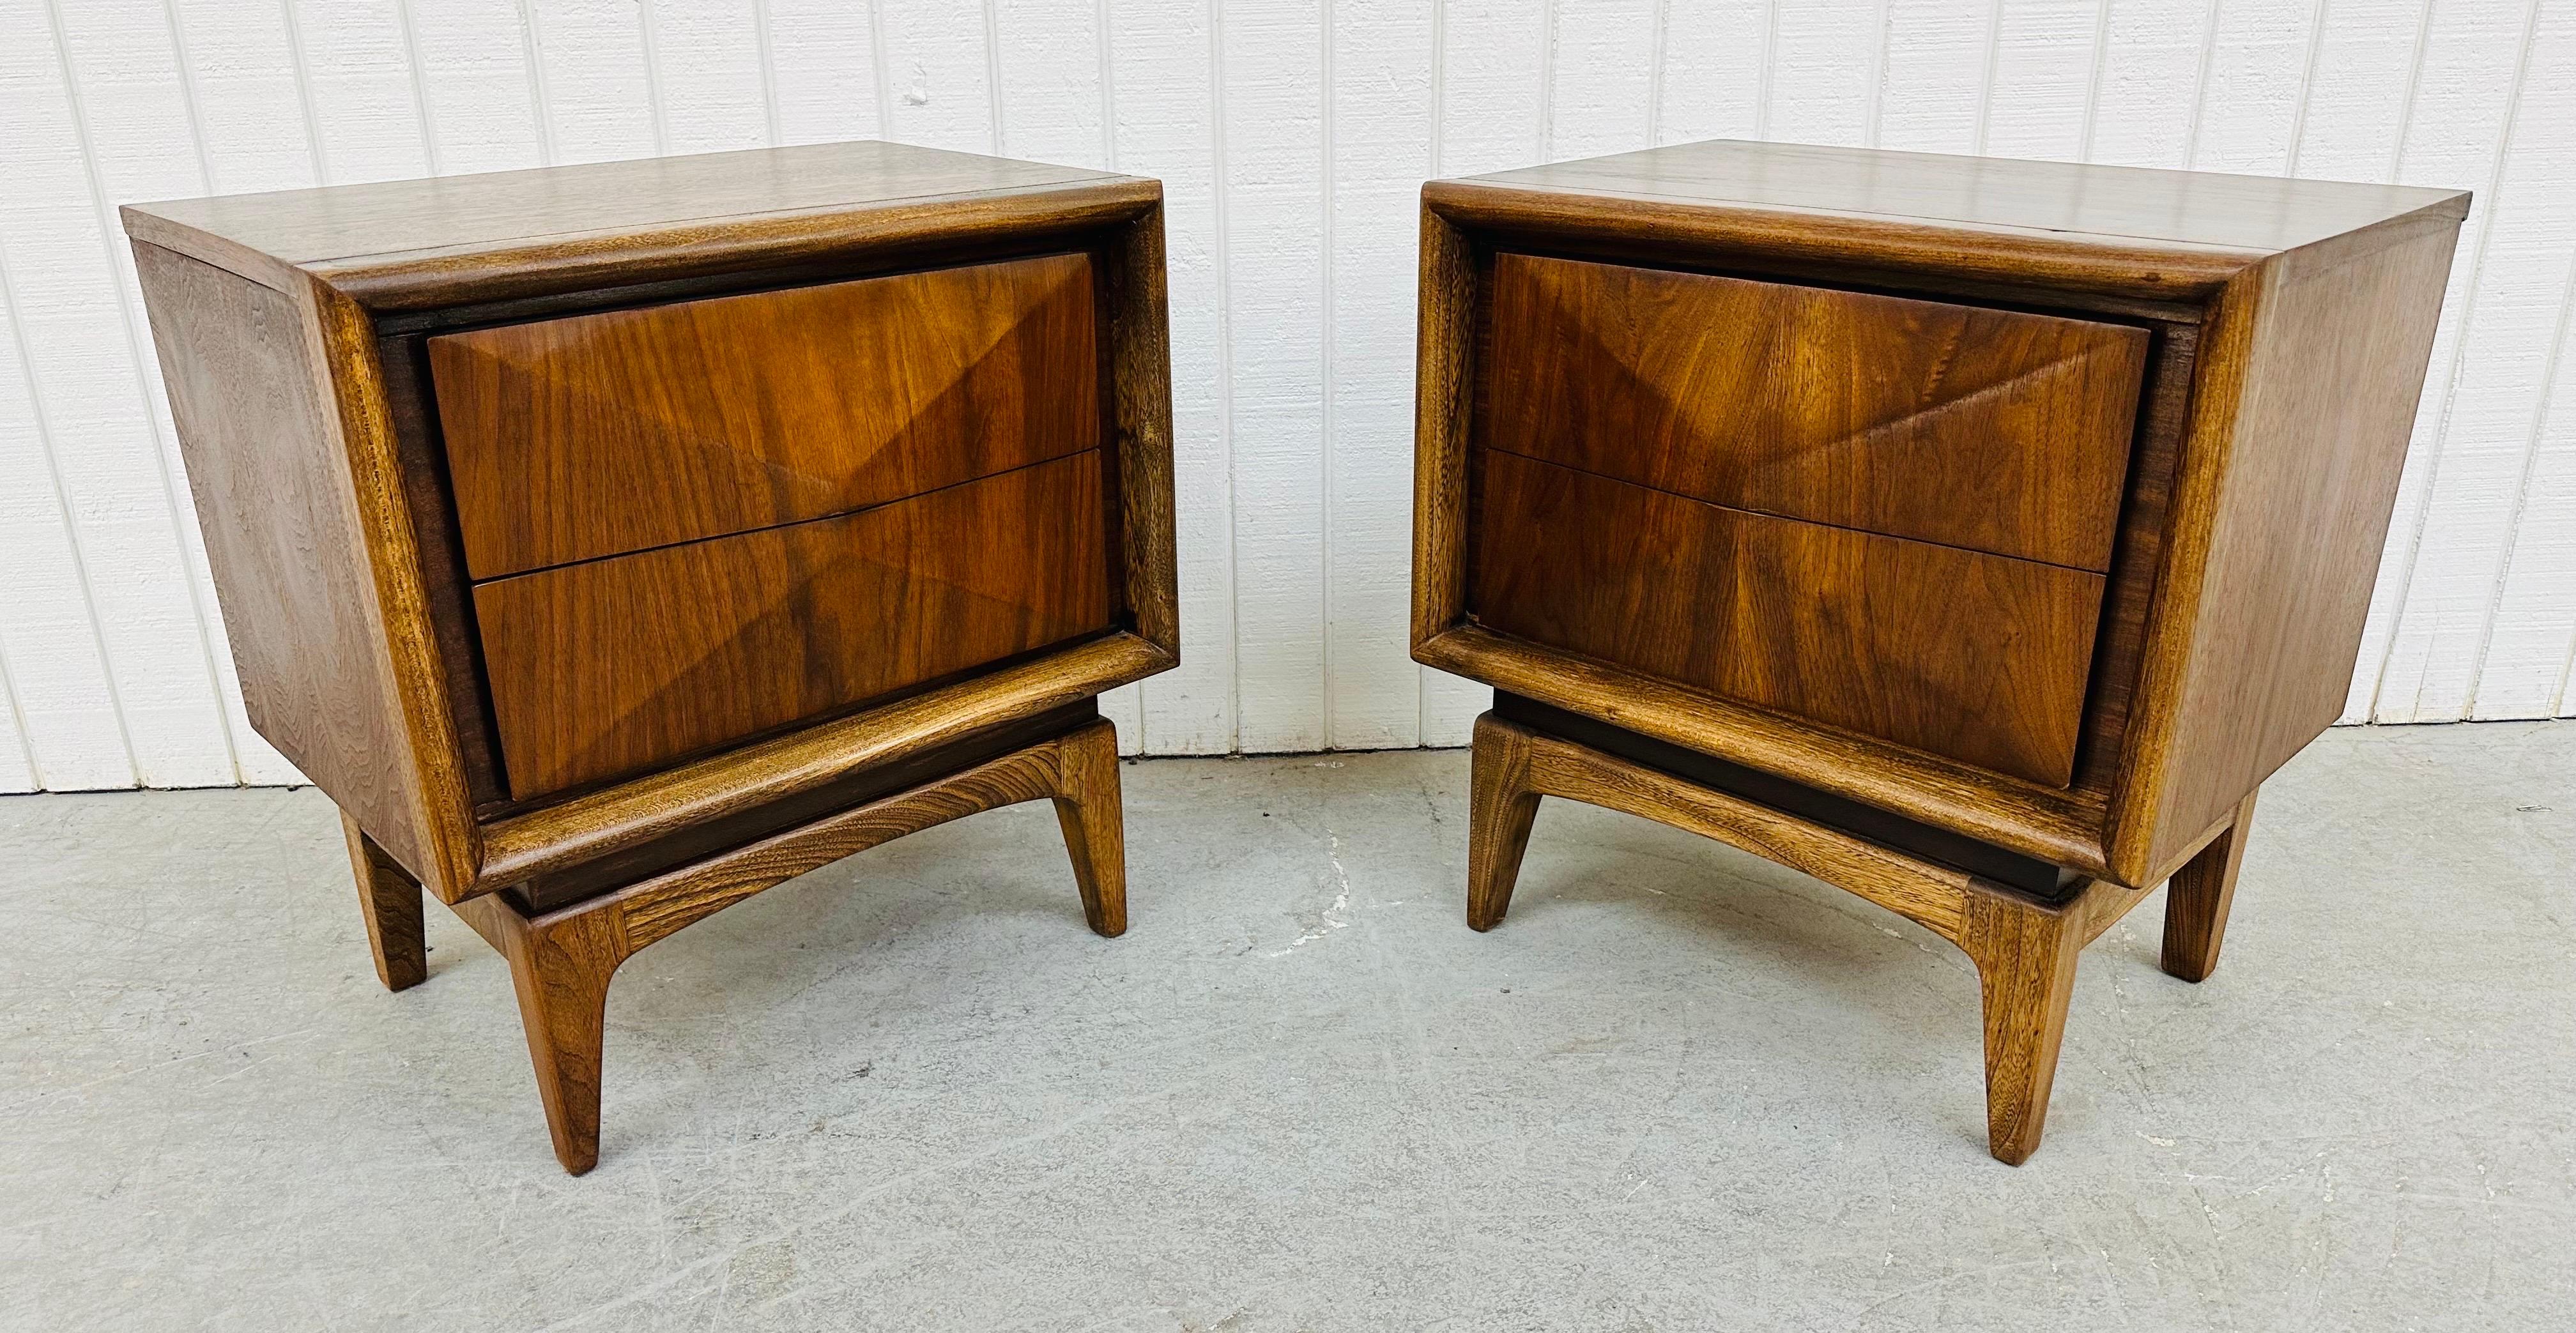 This listing is for a pair of Mid-Century Modern United Diamond Walnut Nightstands. Featuring a straight line design, two diamond shaped drawers for storage, and a beautiful walnut finish. This is an exceptional combination of quality and design by